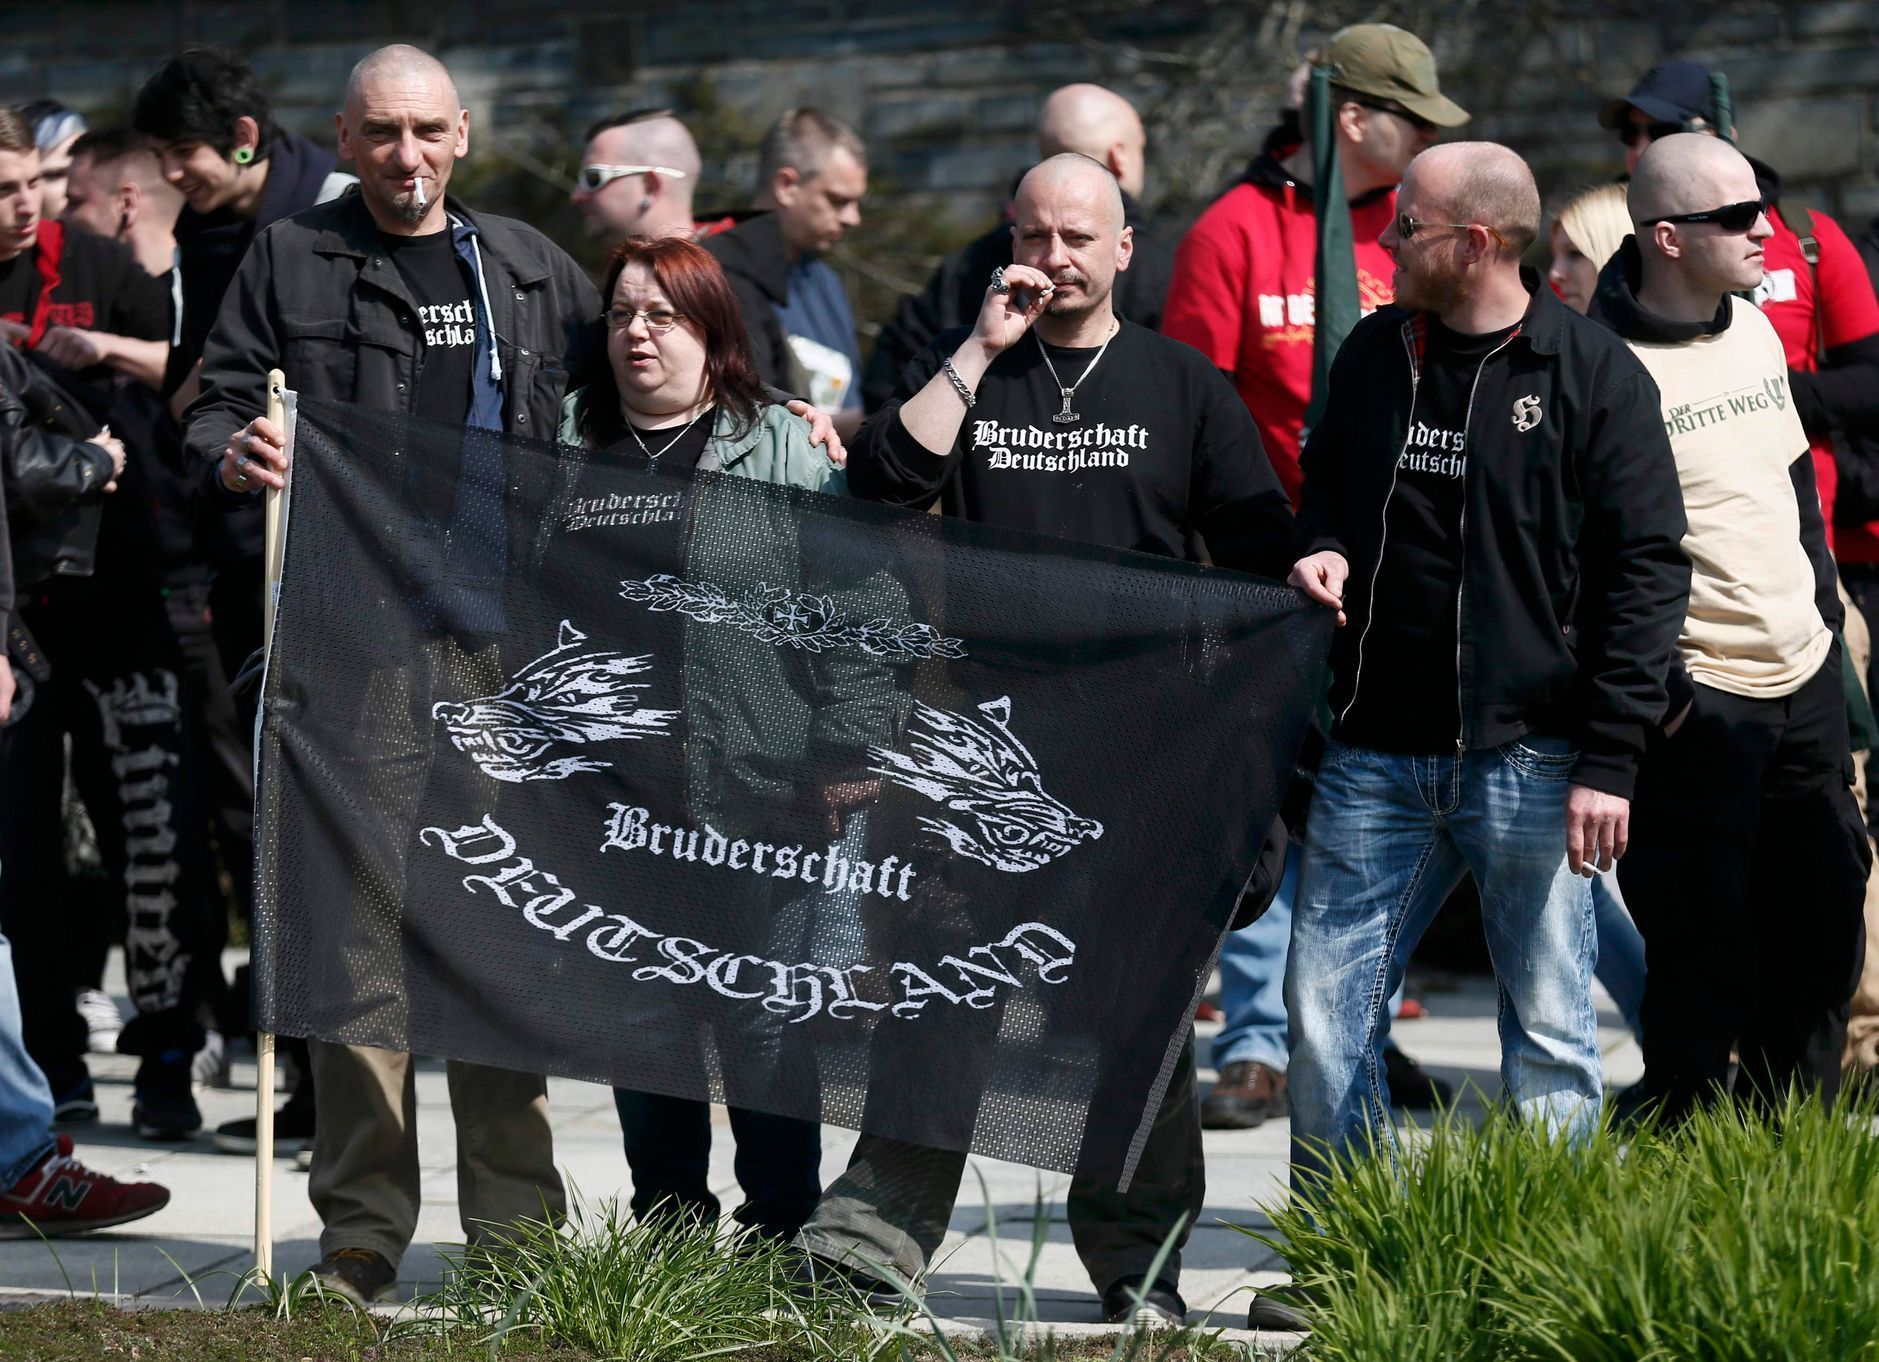 Right-wing protestors stage a demonstration in the town in Plauen